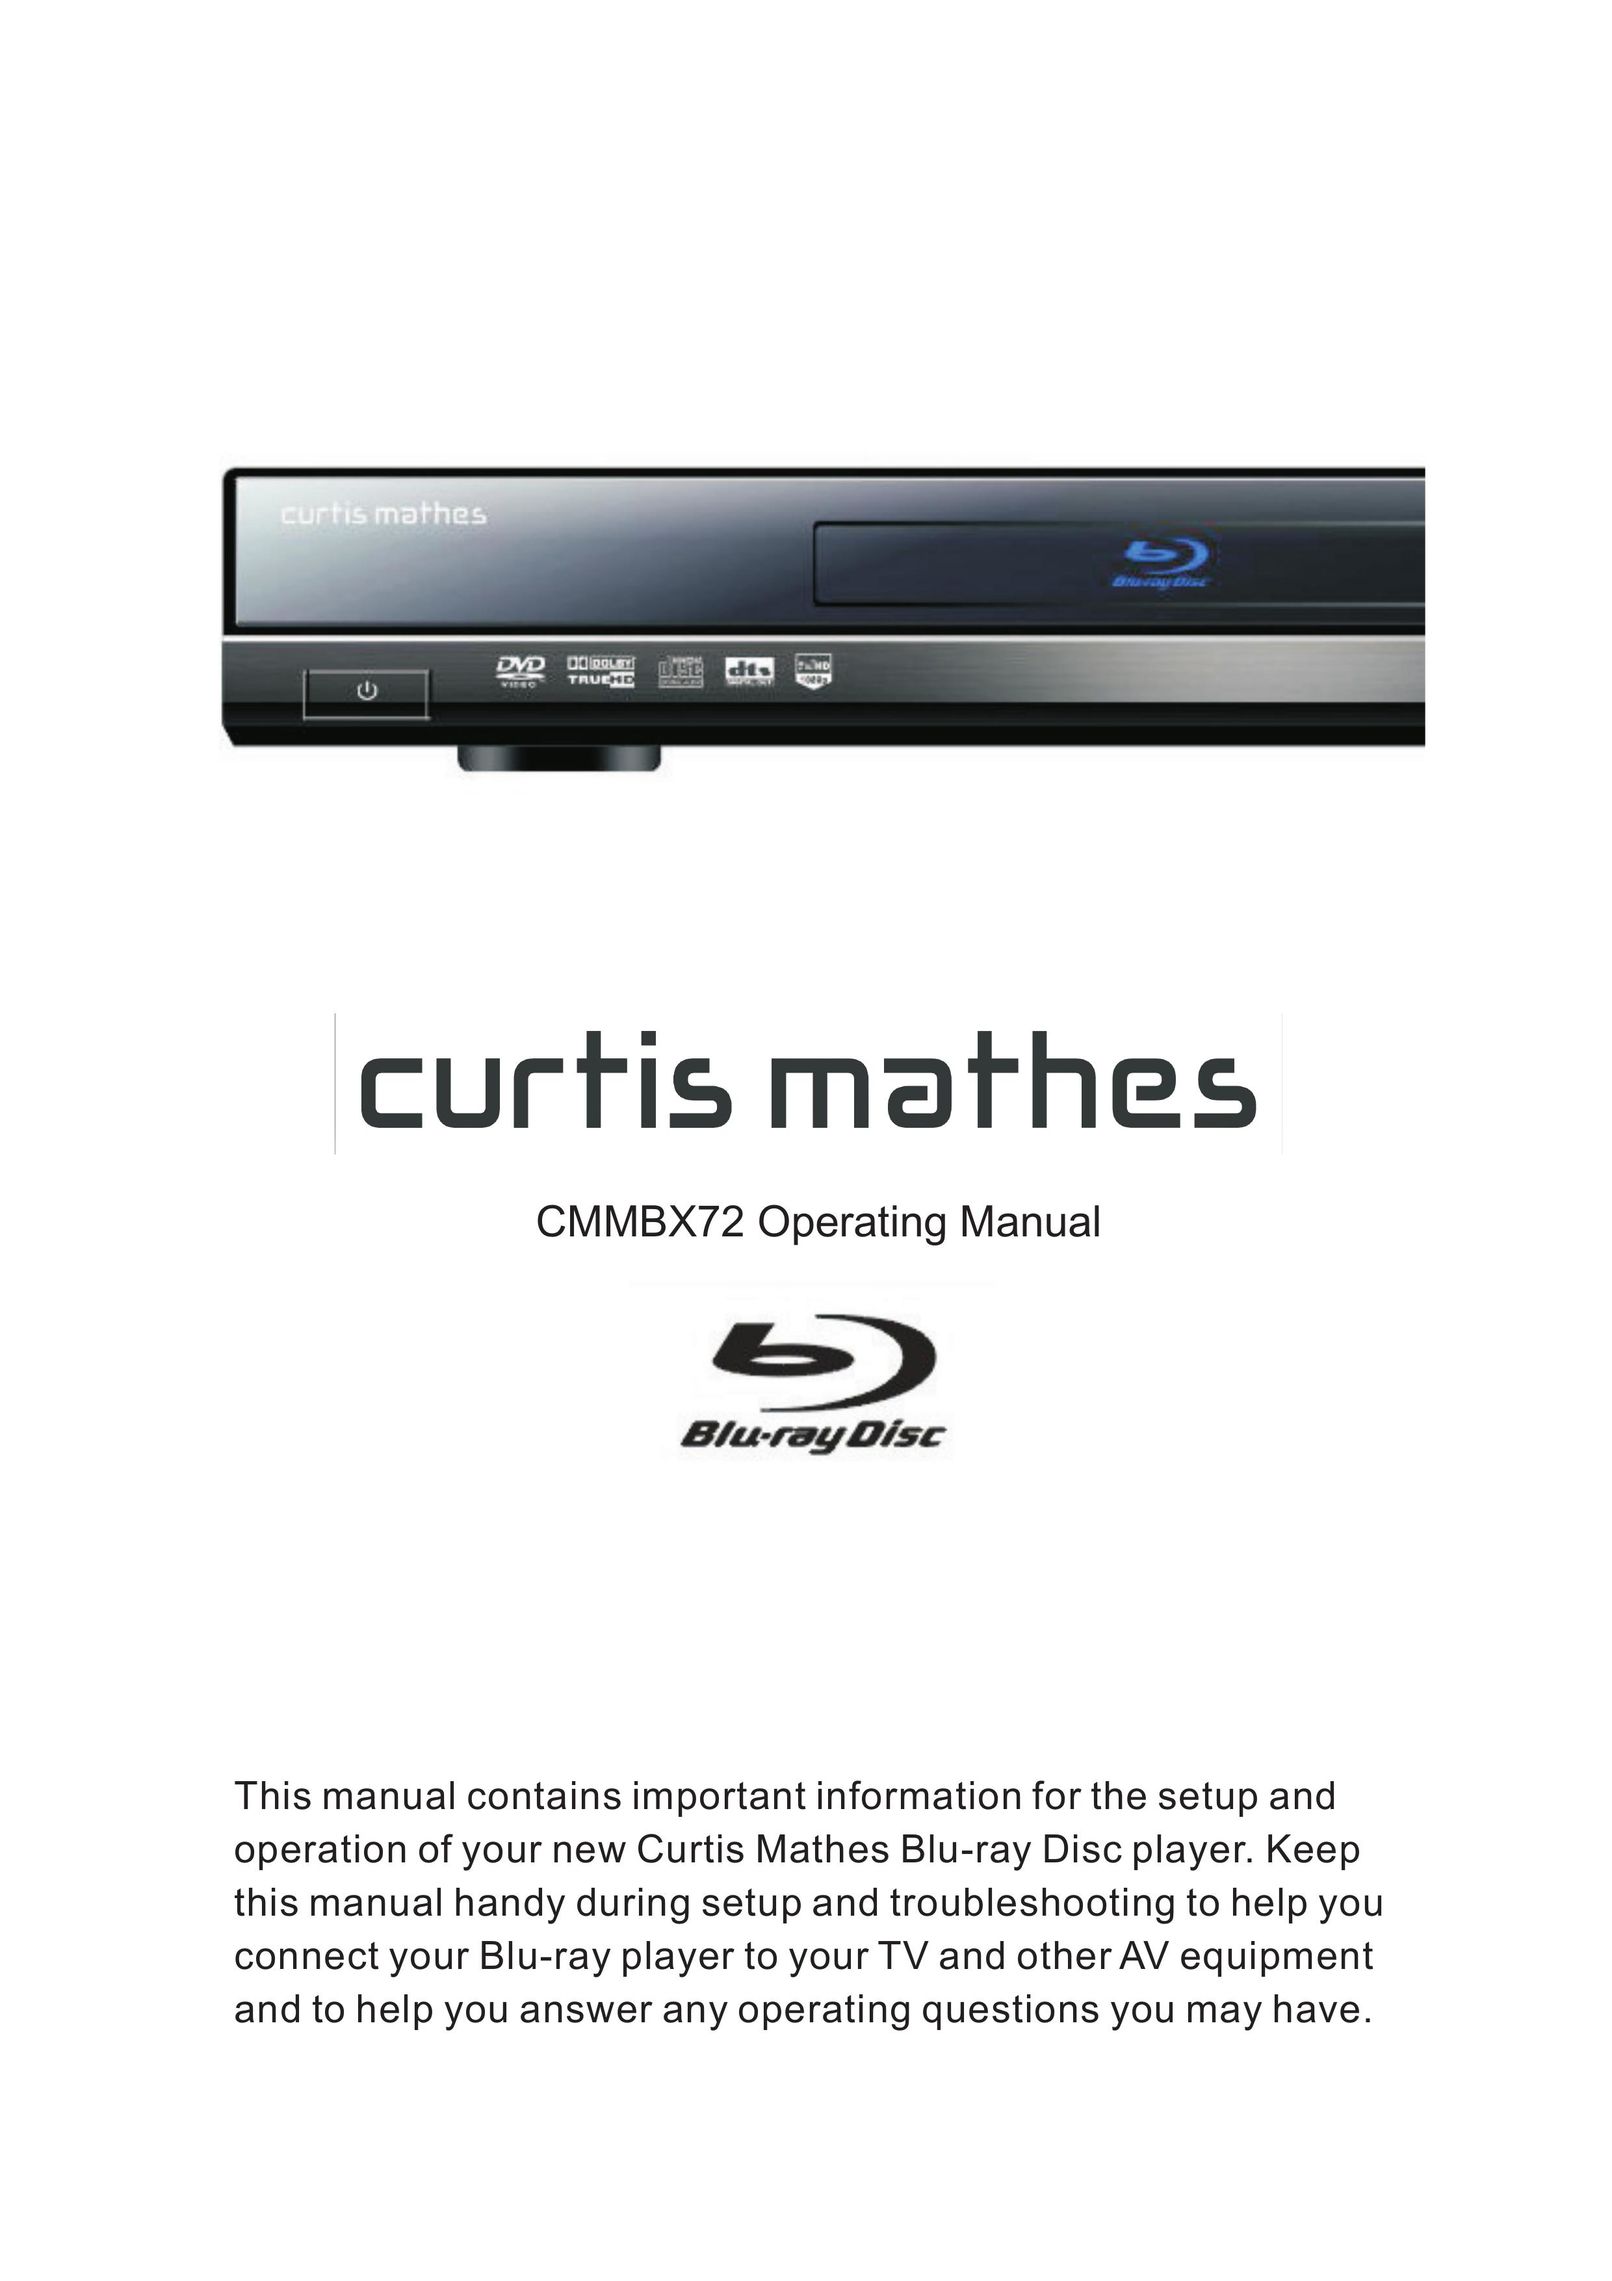 Curtis Mathes CMMBX72 Blu-ray Player User Manual (Page 1)